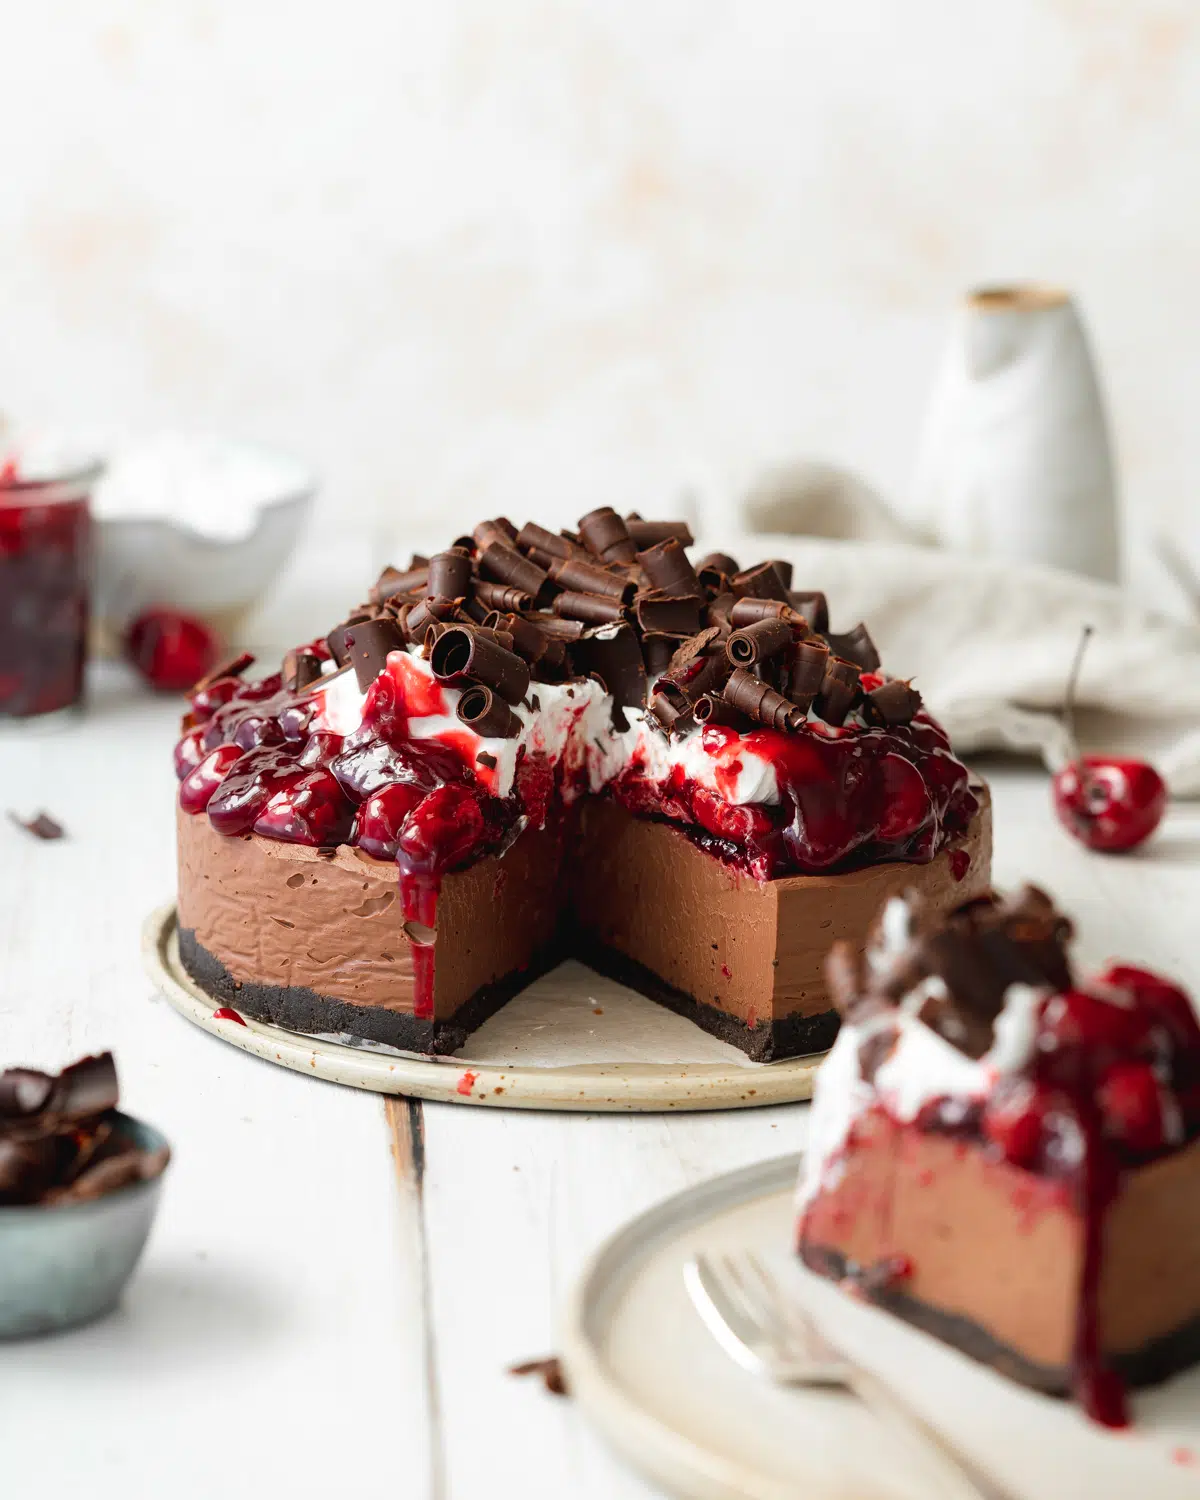 chocolate cherry cheesecake on a white wooden surface with chocolate curls on top.